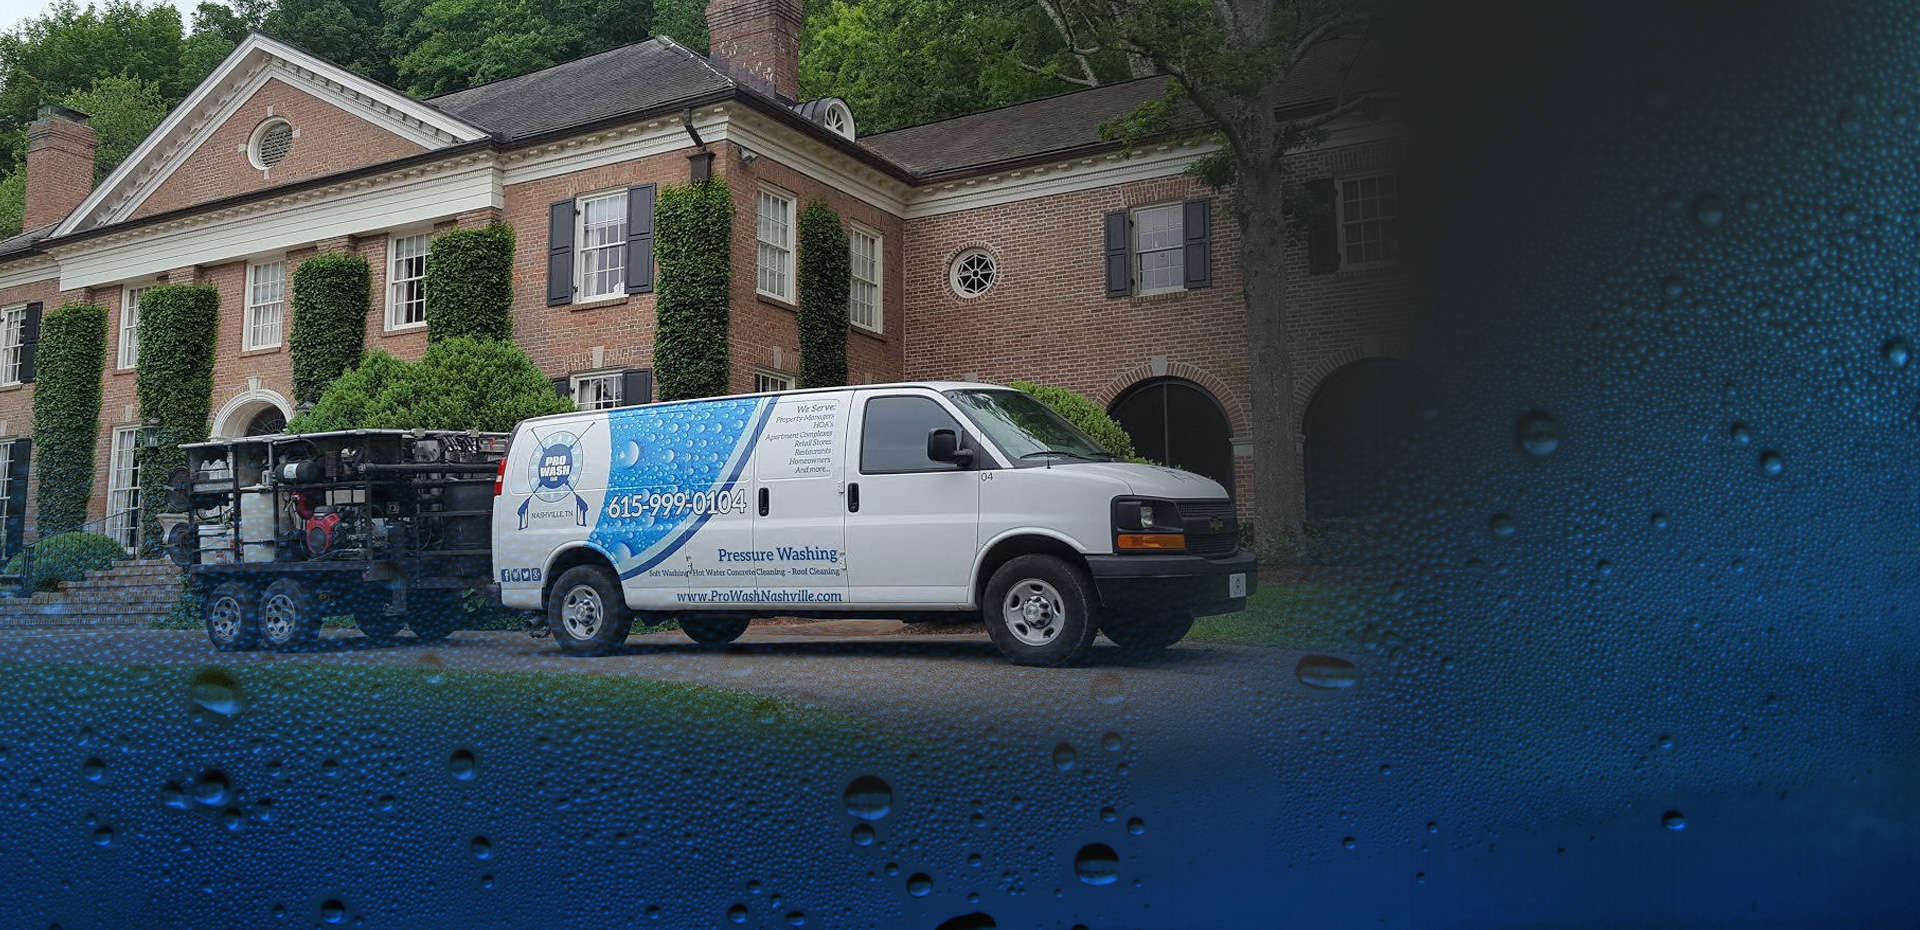 Sonic Services - Power Washing, Roof Cleaning, & Window Cleaning And Pressure Washing Company Minneapolis Mn